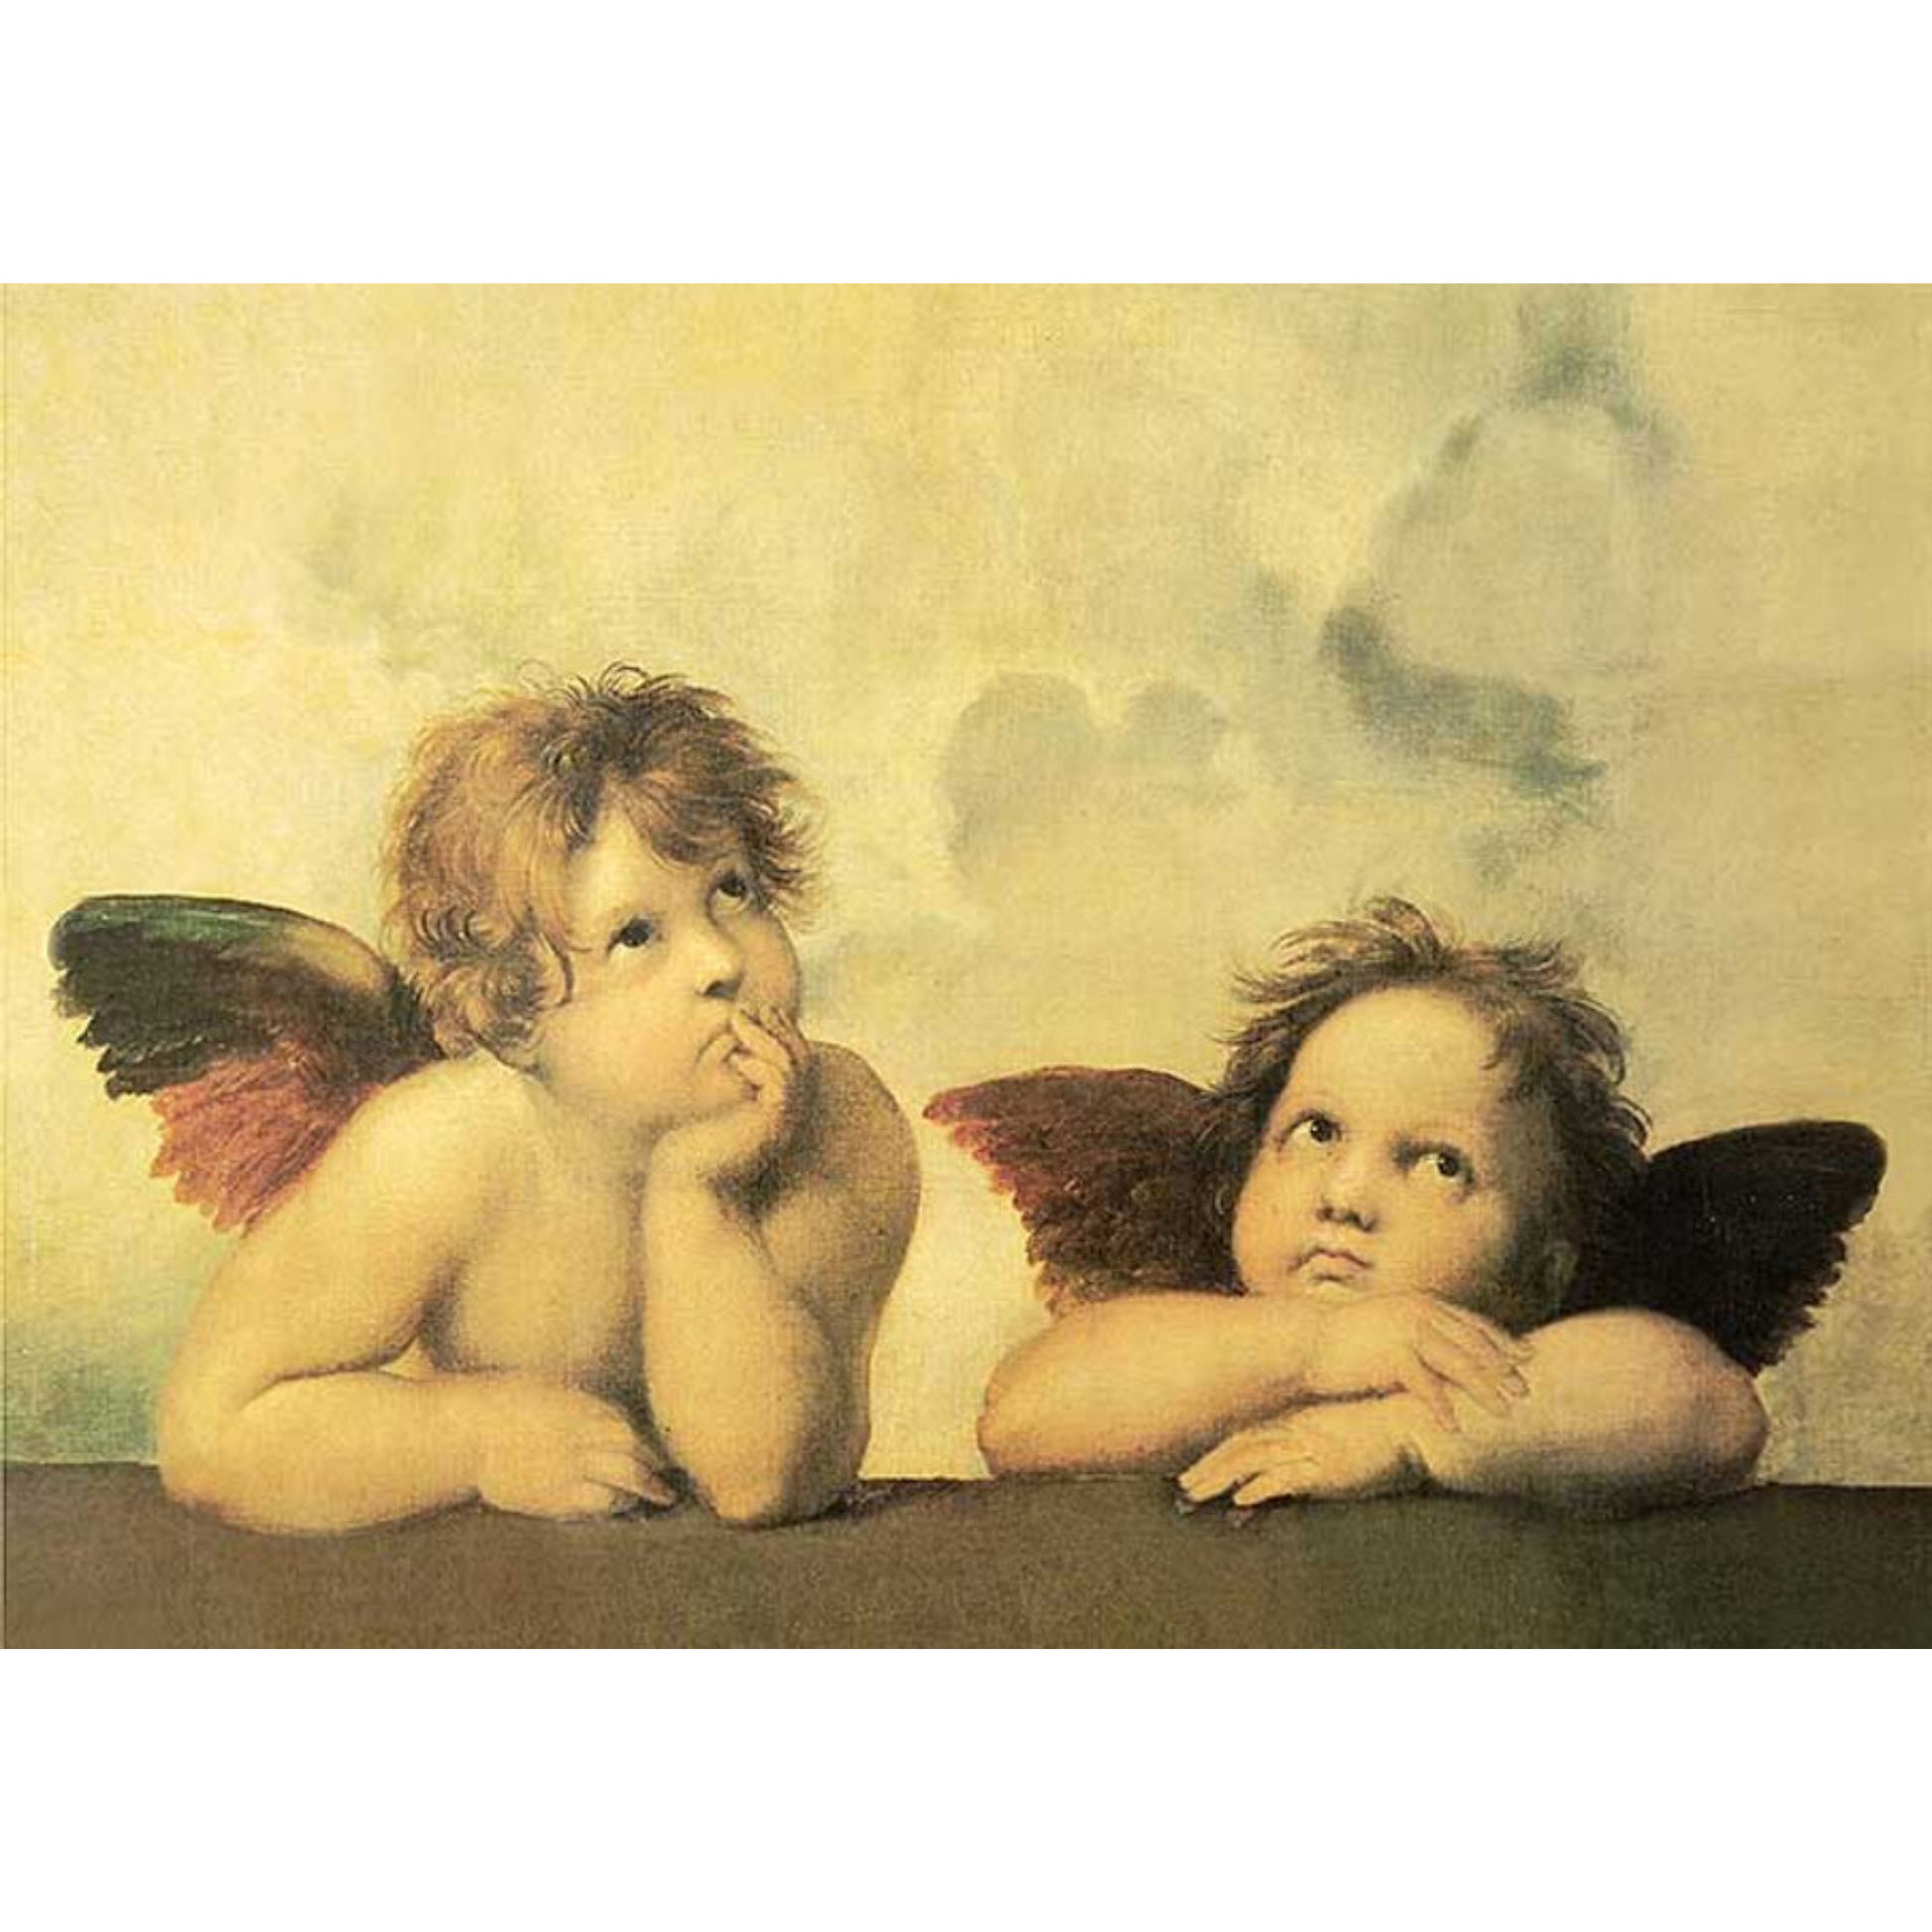 "Raphael- Cherubs" decoupage rice paper by Paper Designs. Available in size A4 at Milton's Daughter.